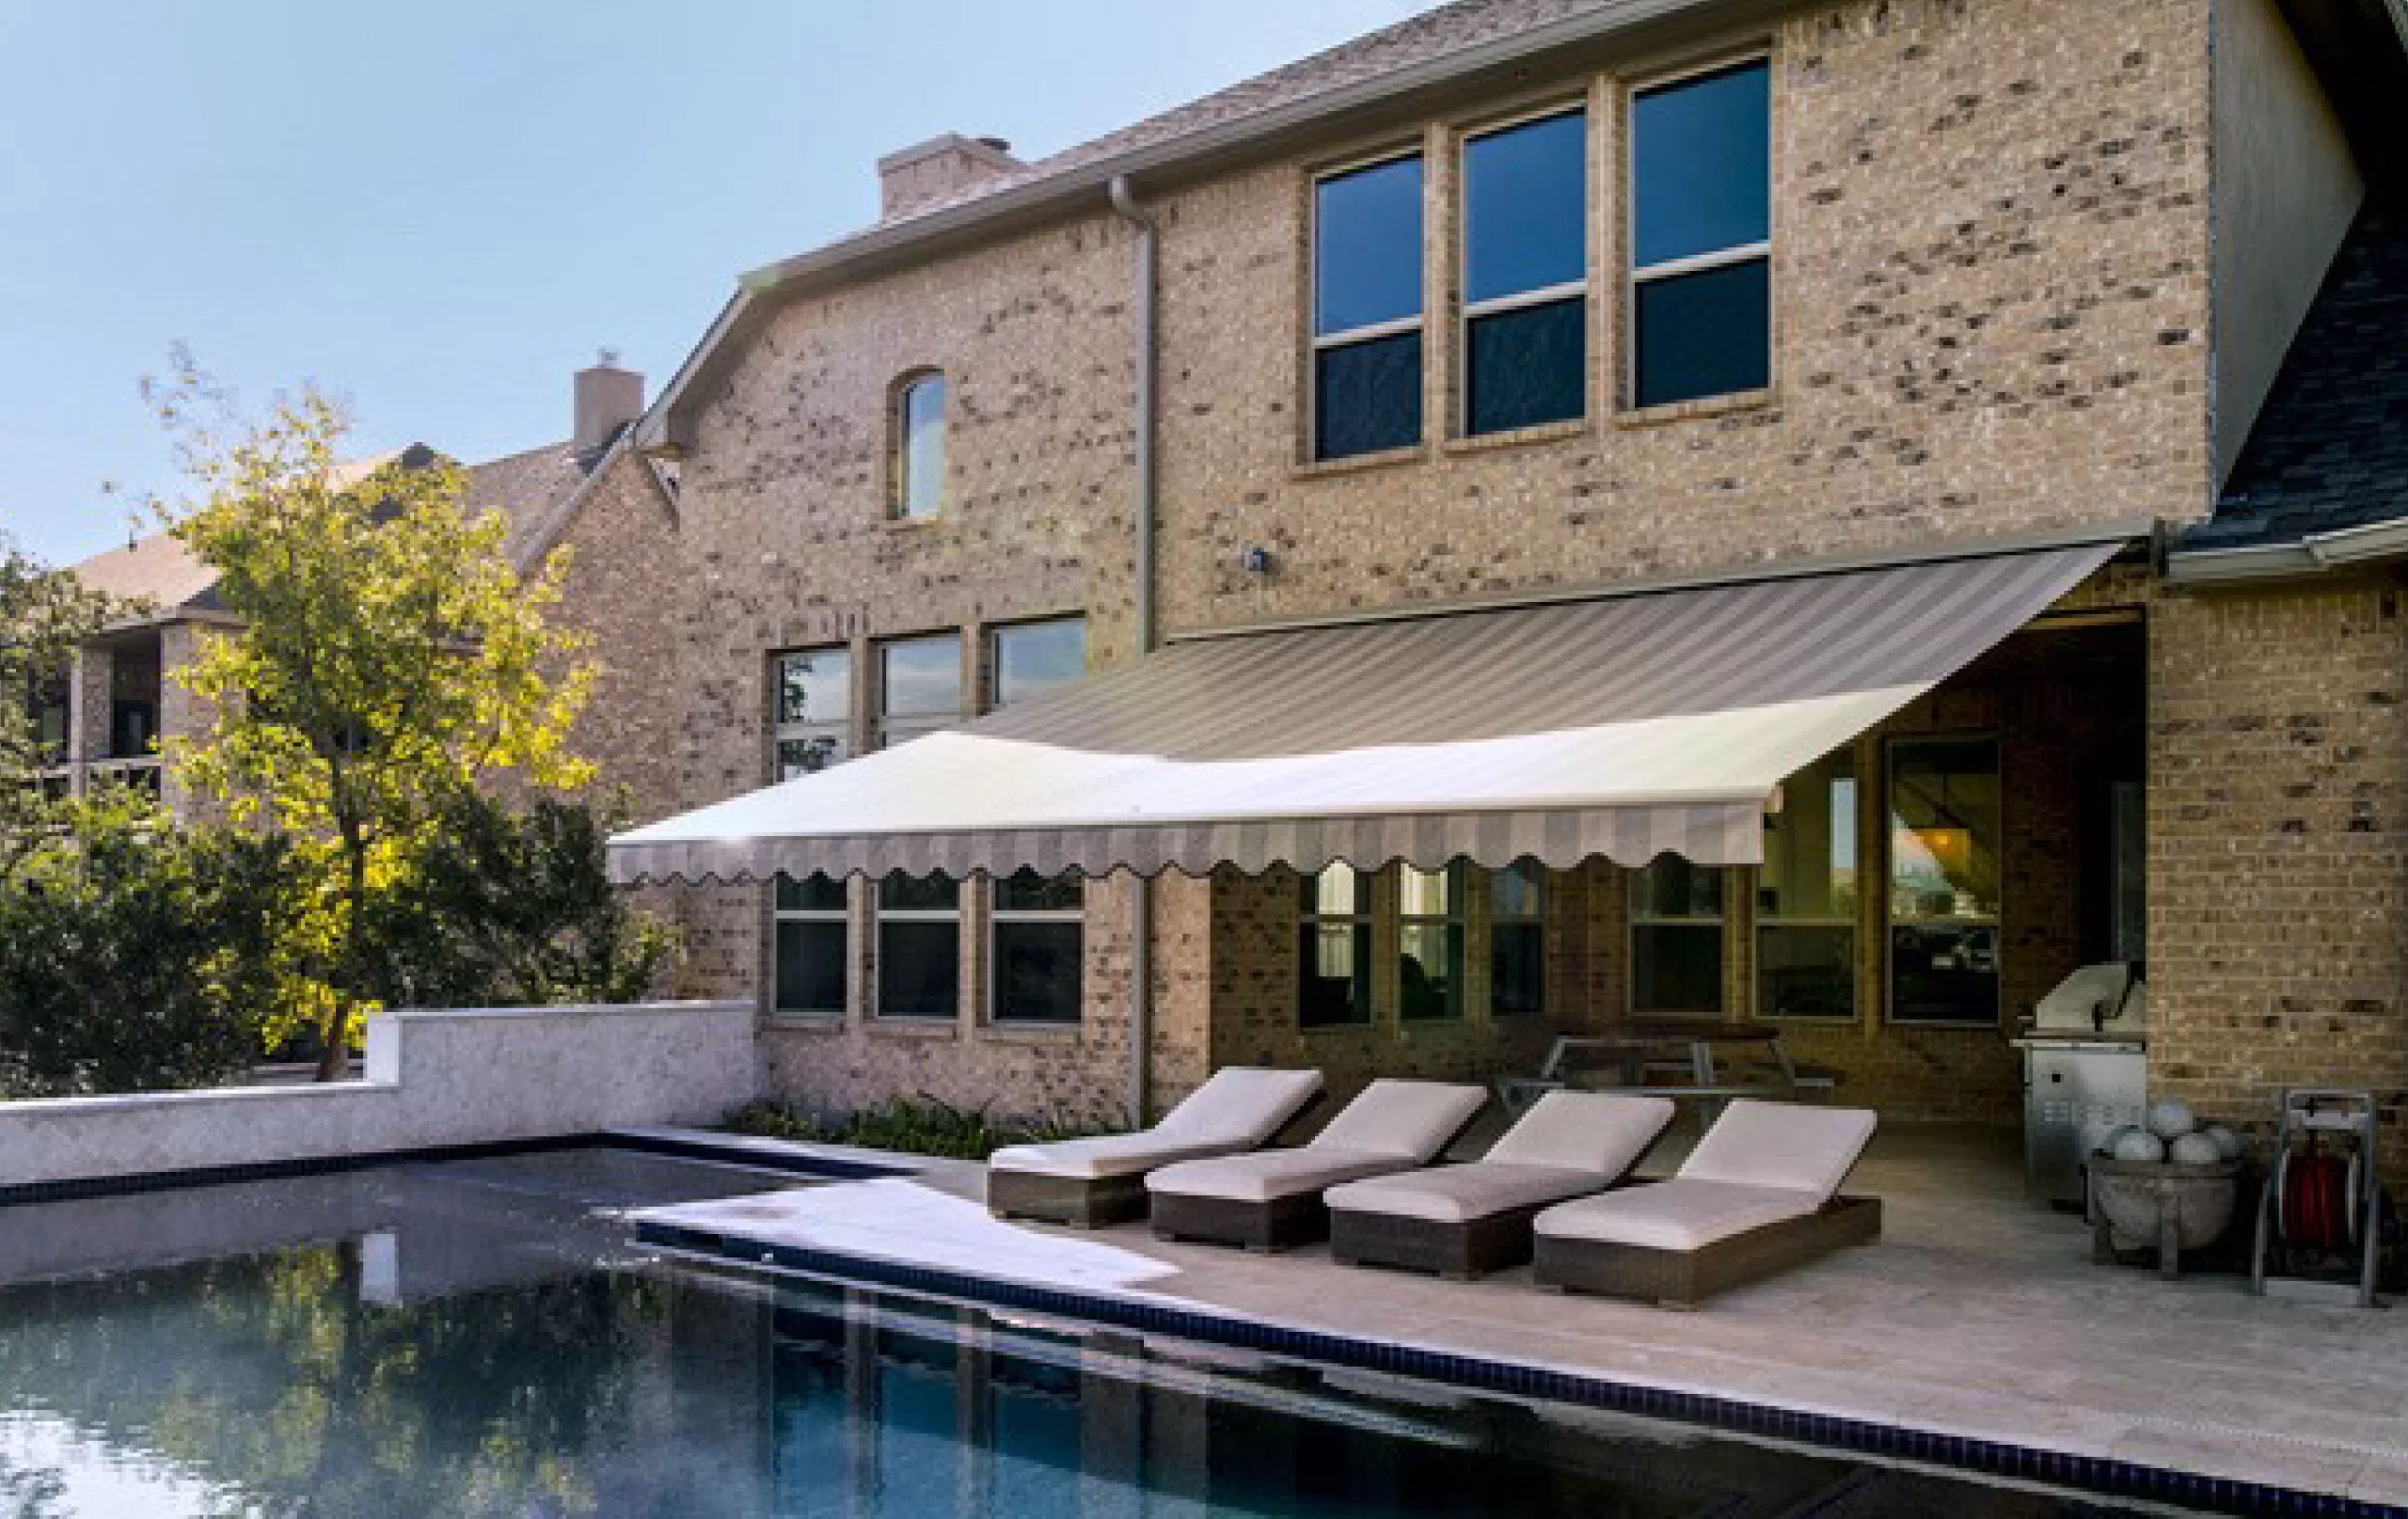 retractable awnings by sunesta on the back patio next to a pool